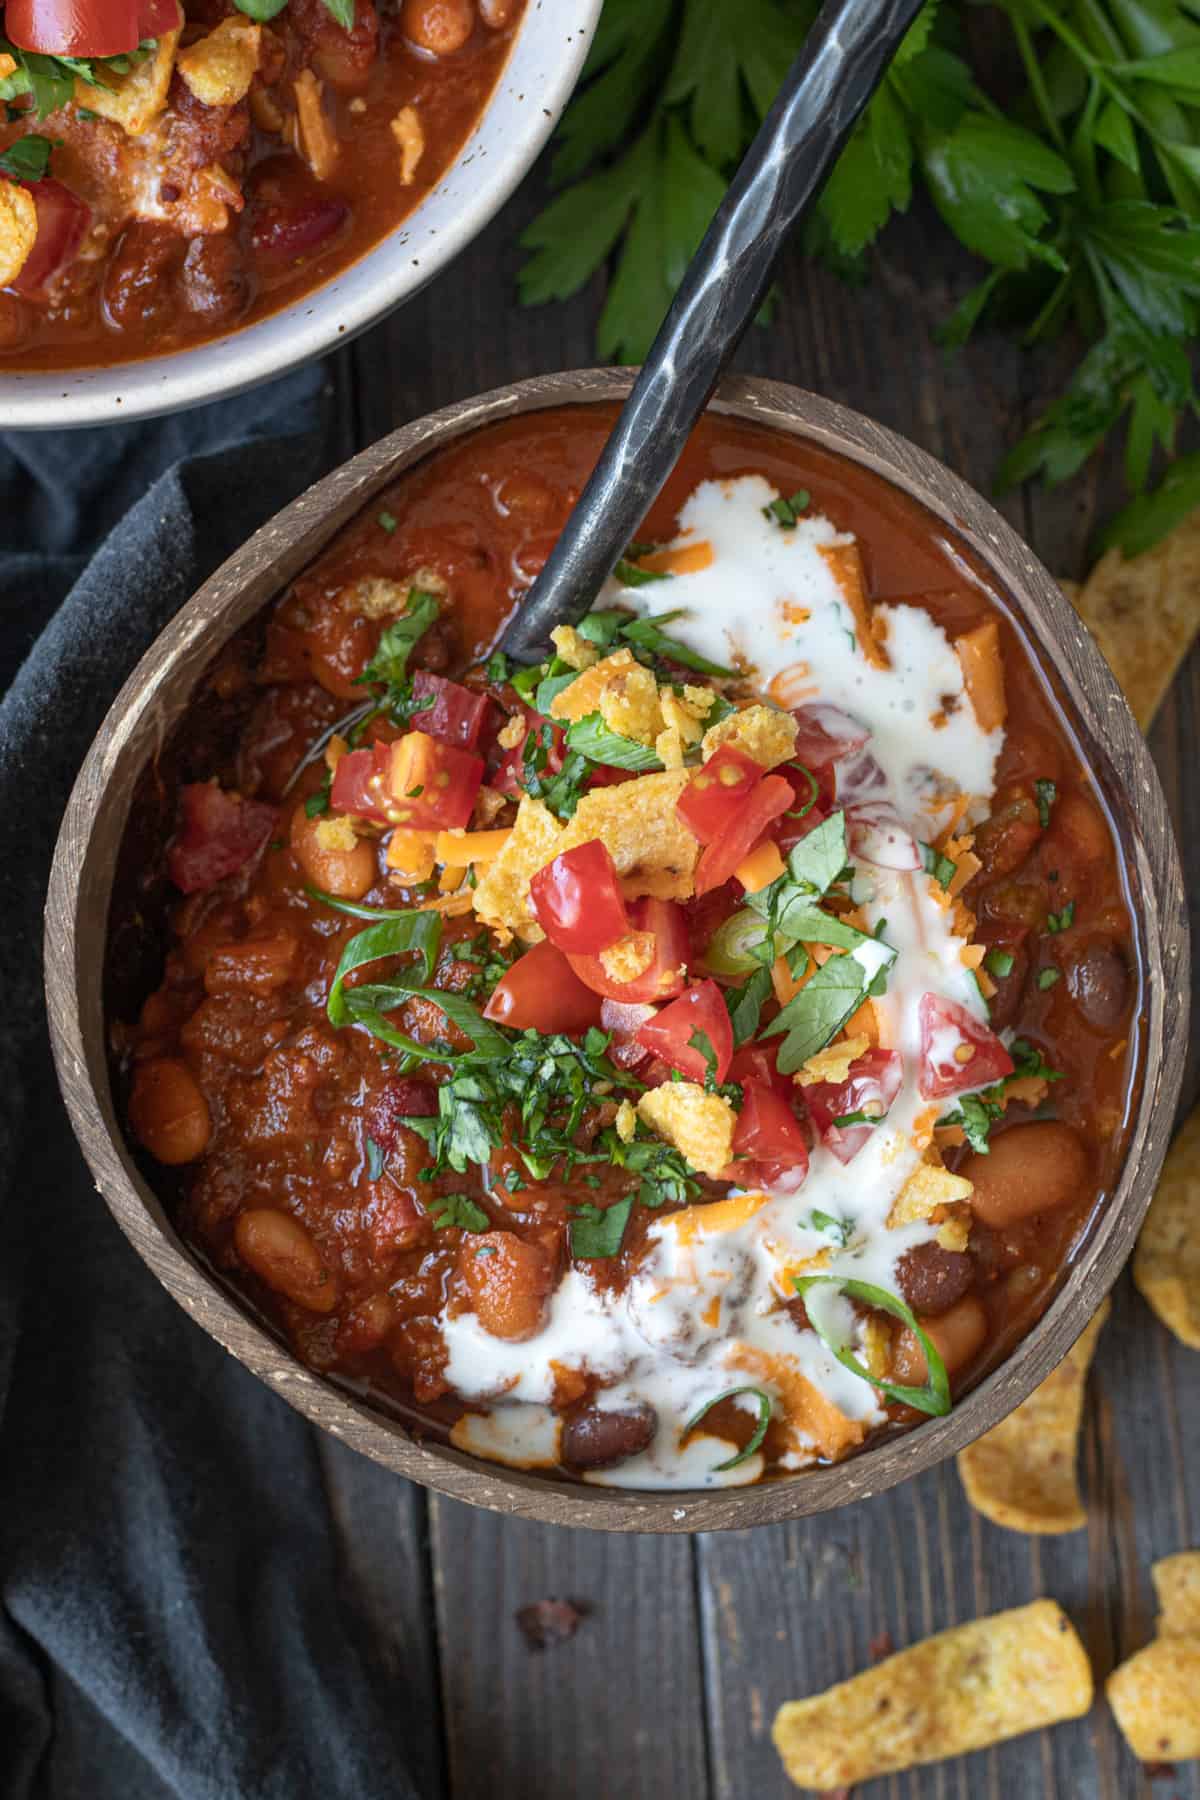 Bowlful of vegan bean and Beyond meat chili with sour cream swirl.